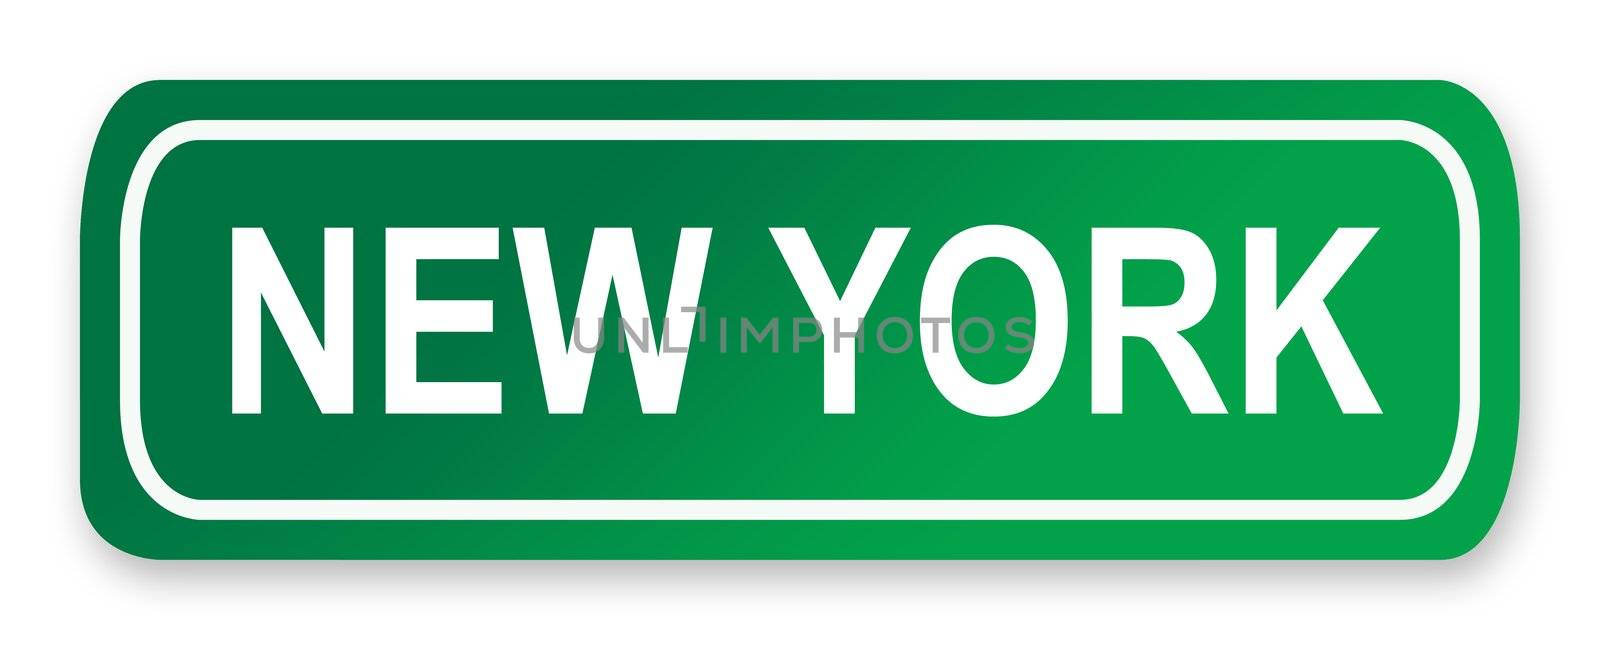 New York street or road sign isolated on white, America.